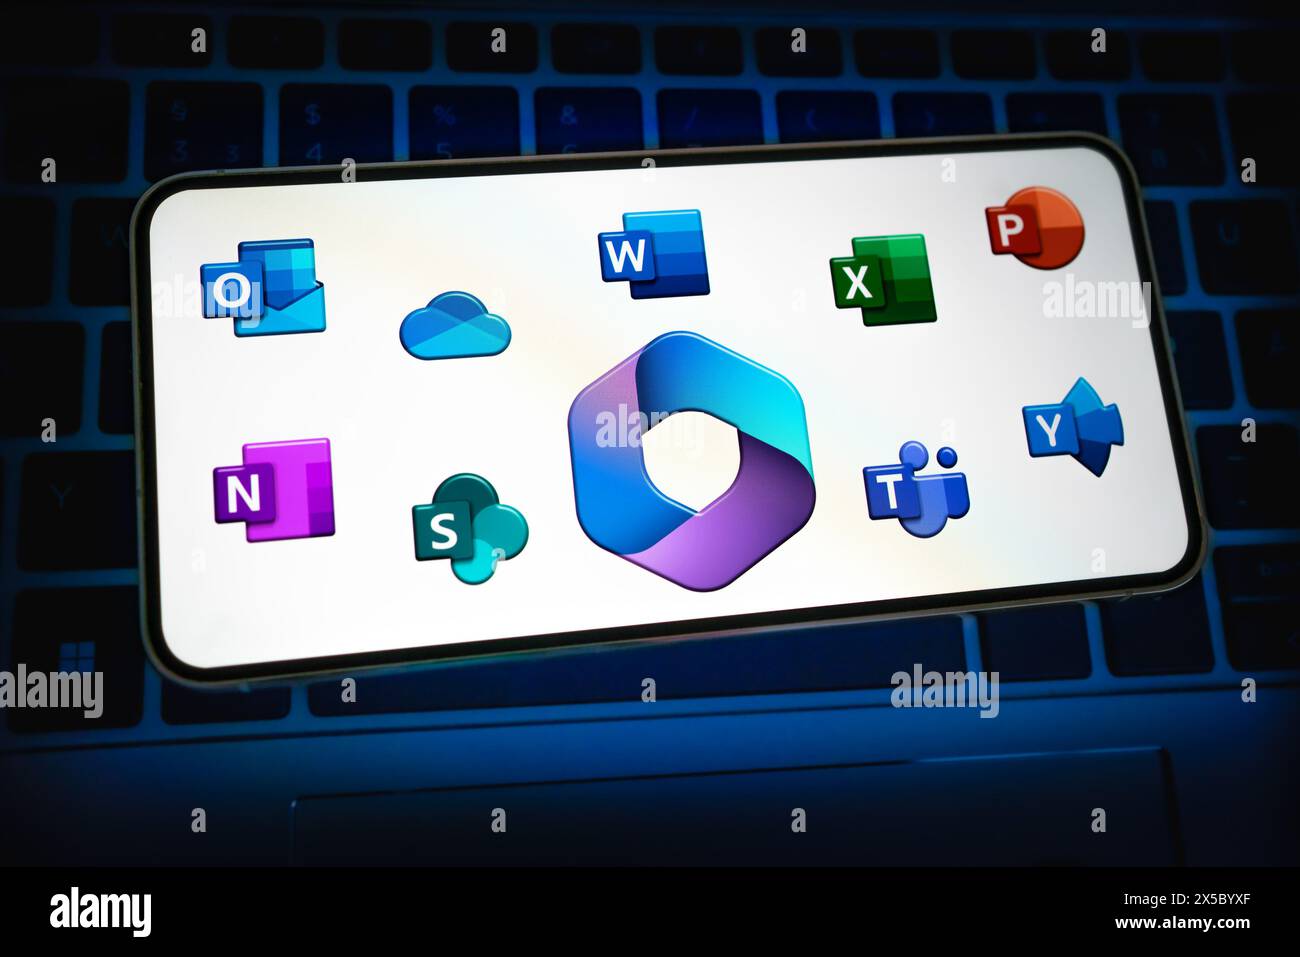 Microsoft office 365 software displayed on mobile device Stock Photo